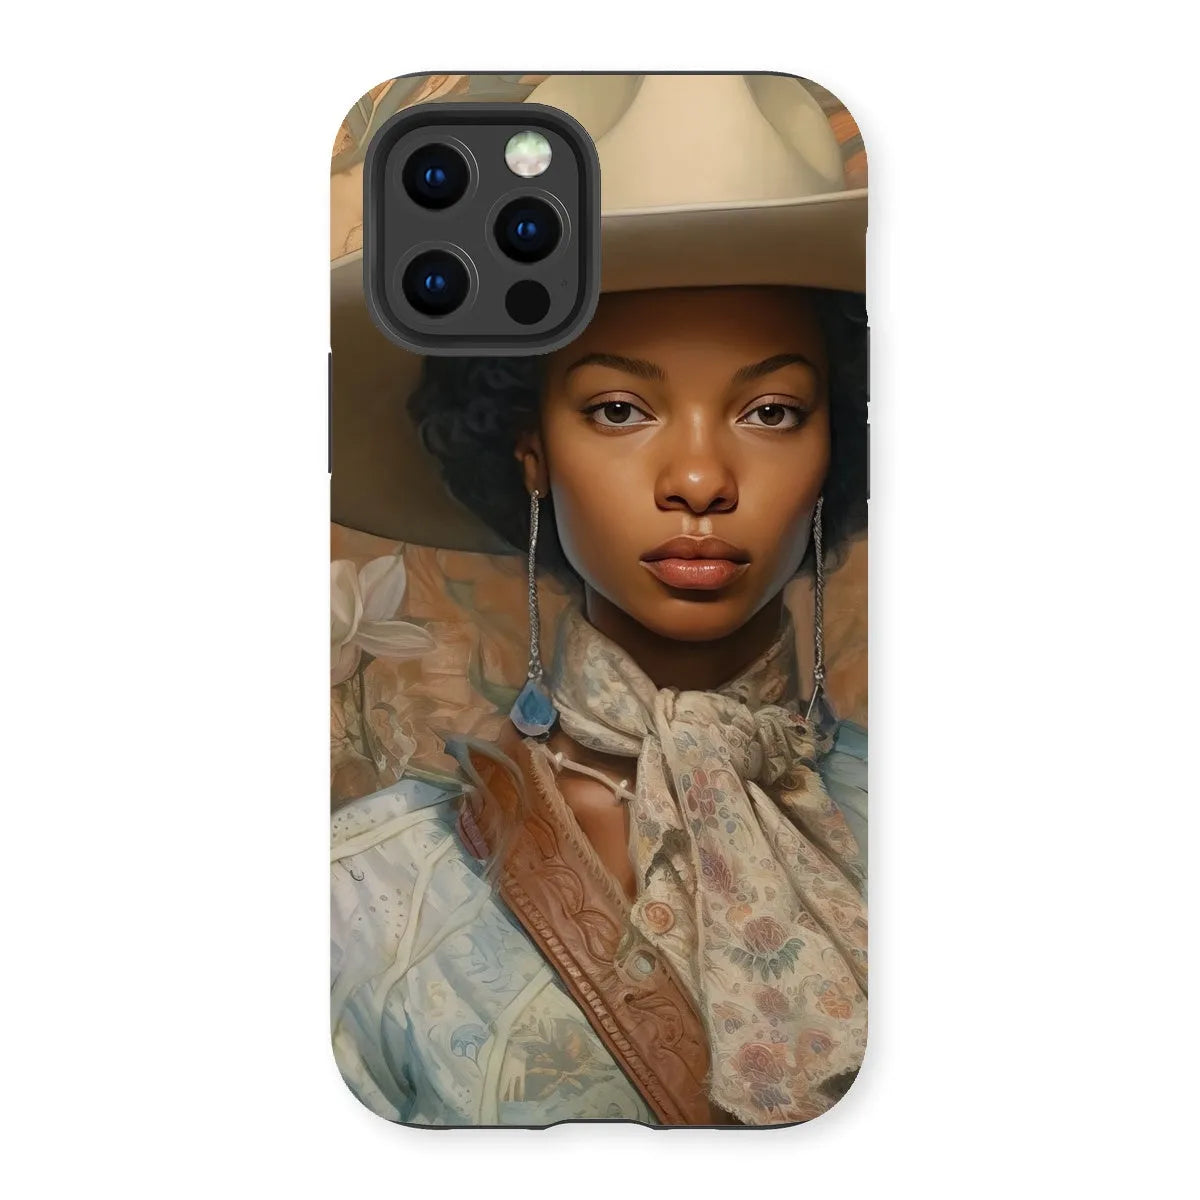 Imani The Lesbian Cowgirl - Sapphic Art Phone Case - Iphone 13 Pro / Matte - Mobile Phone Cases - Aesthetic Art